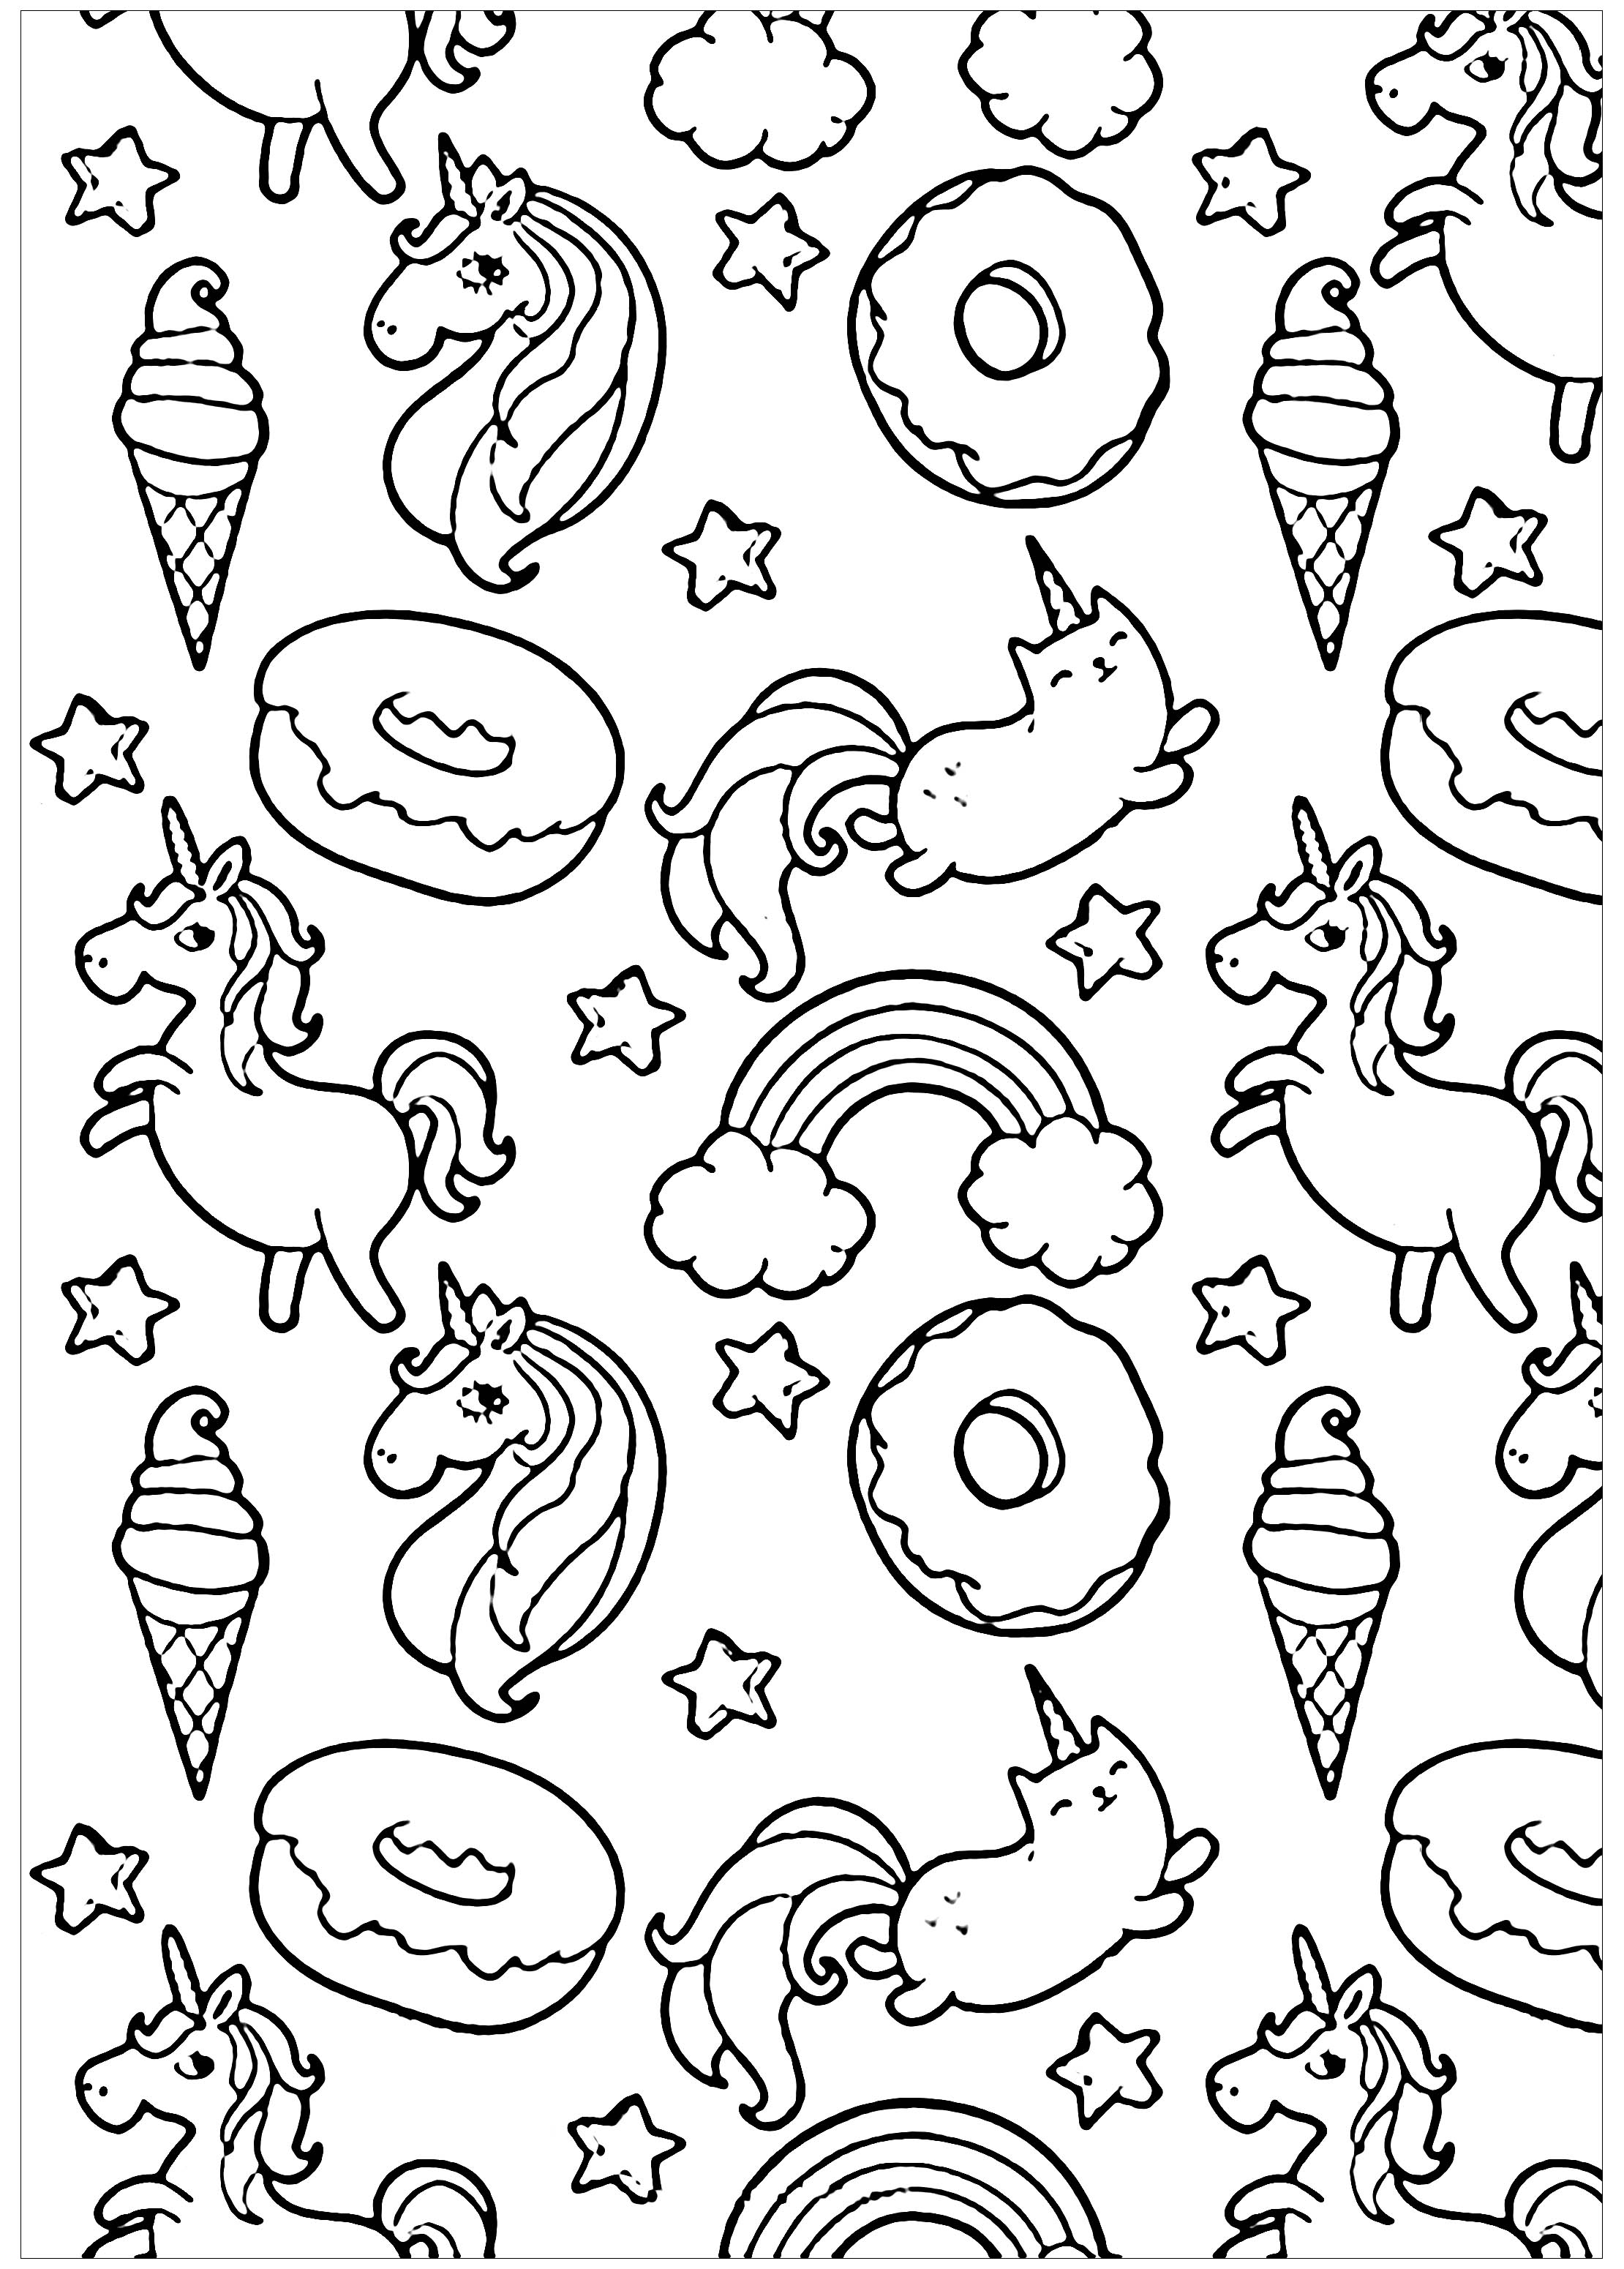 Pusheen donuts and unicorn   Doodle Art / Doodling Adult Coloring ...